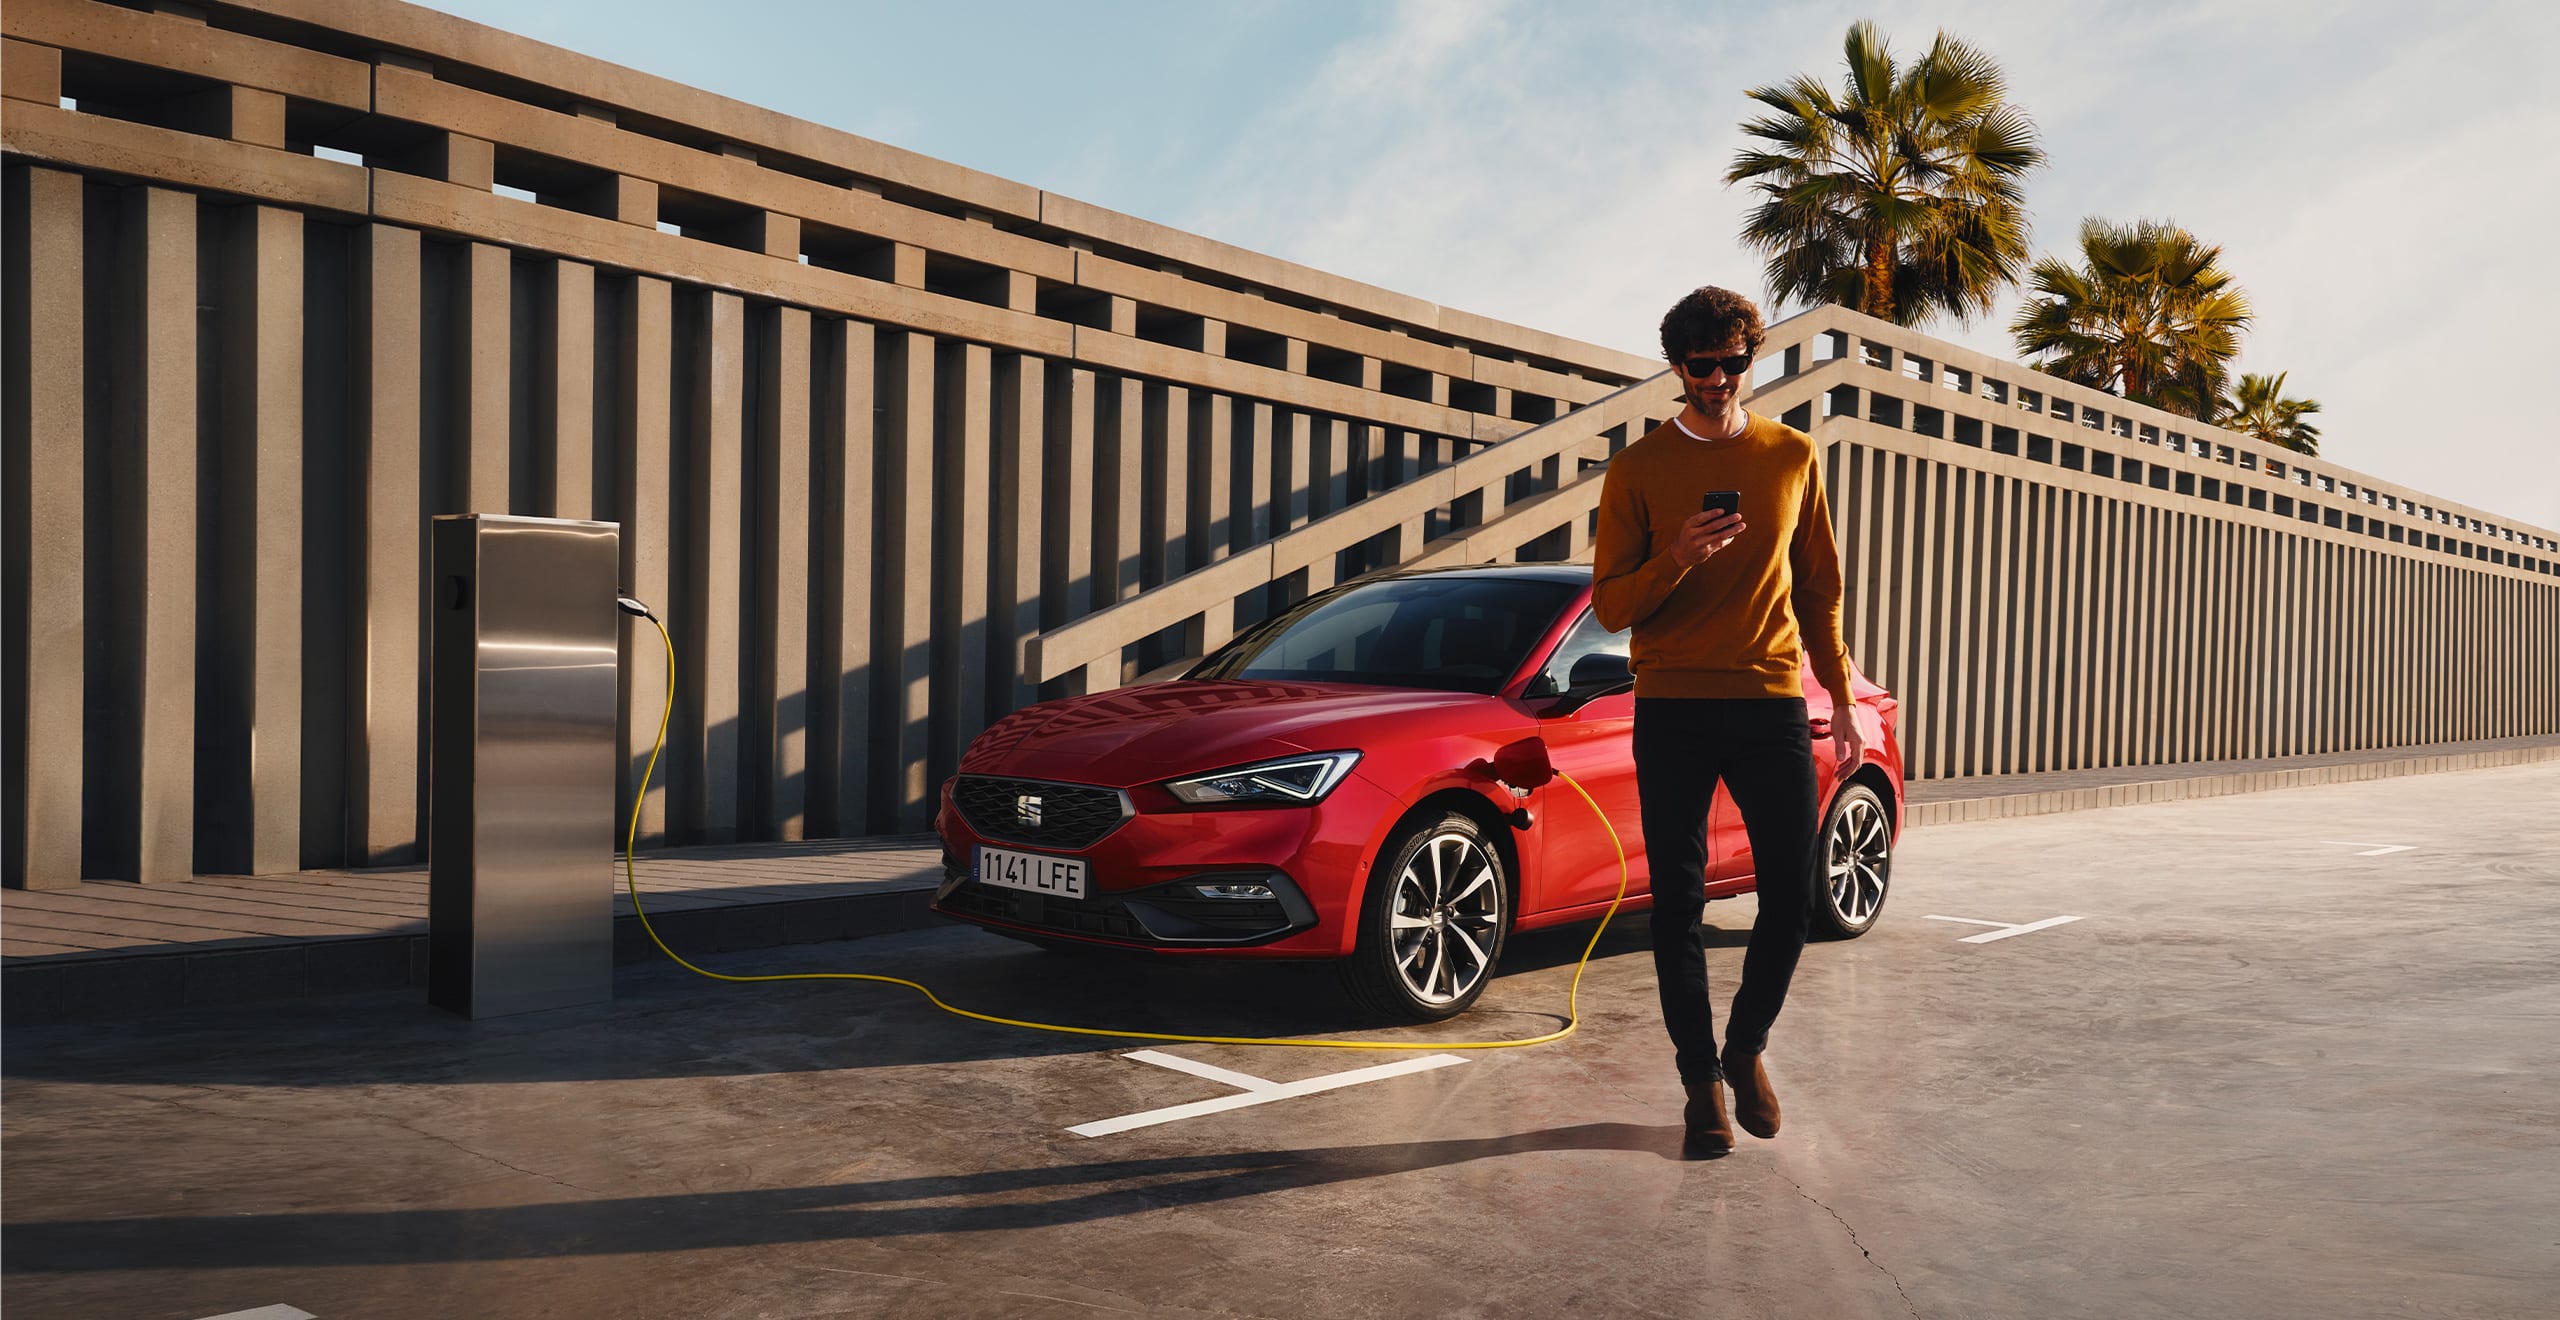 seat leon e-hybrid seat customer services aftercare services